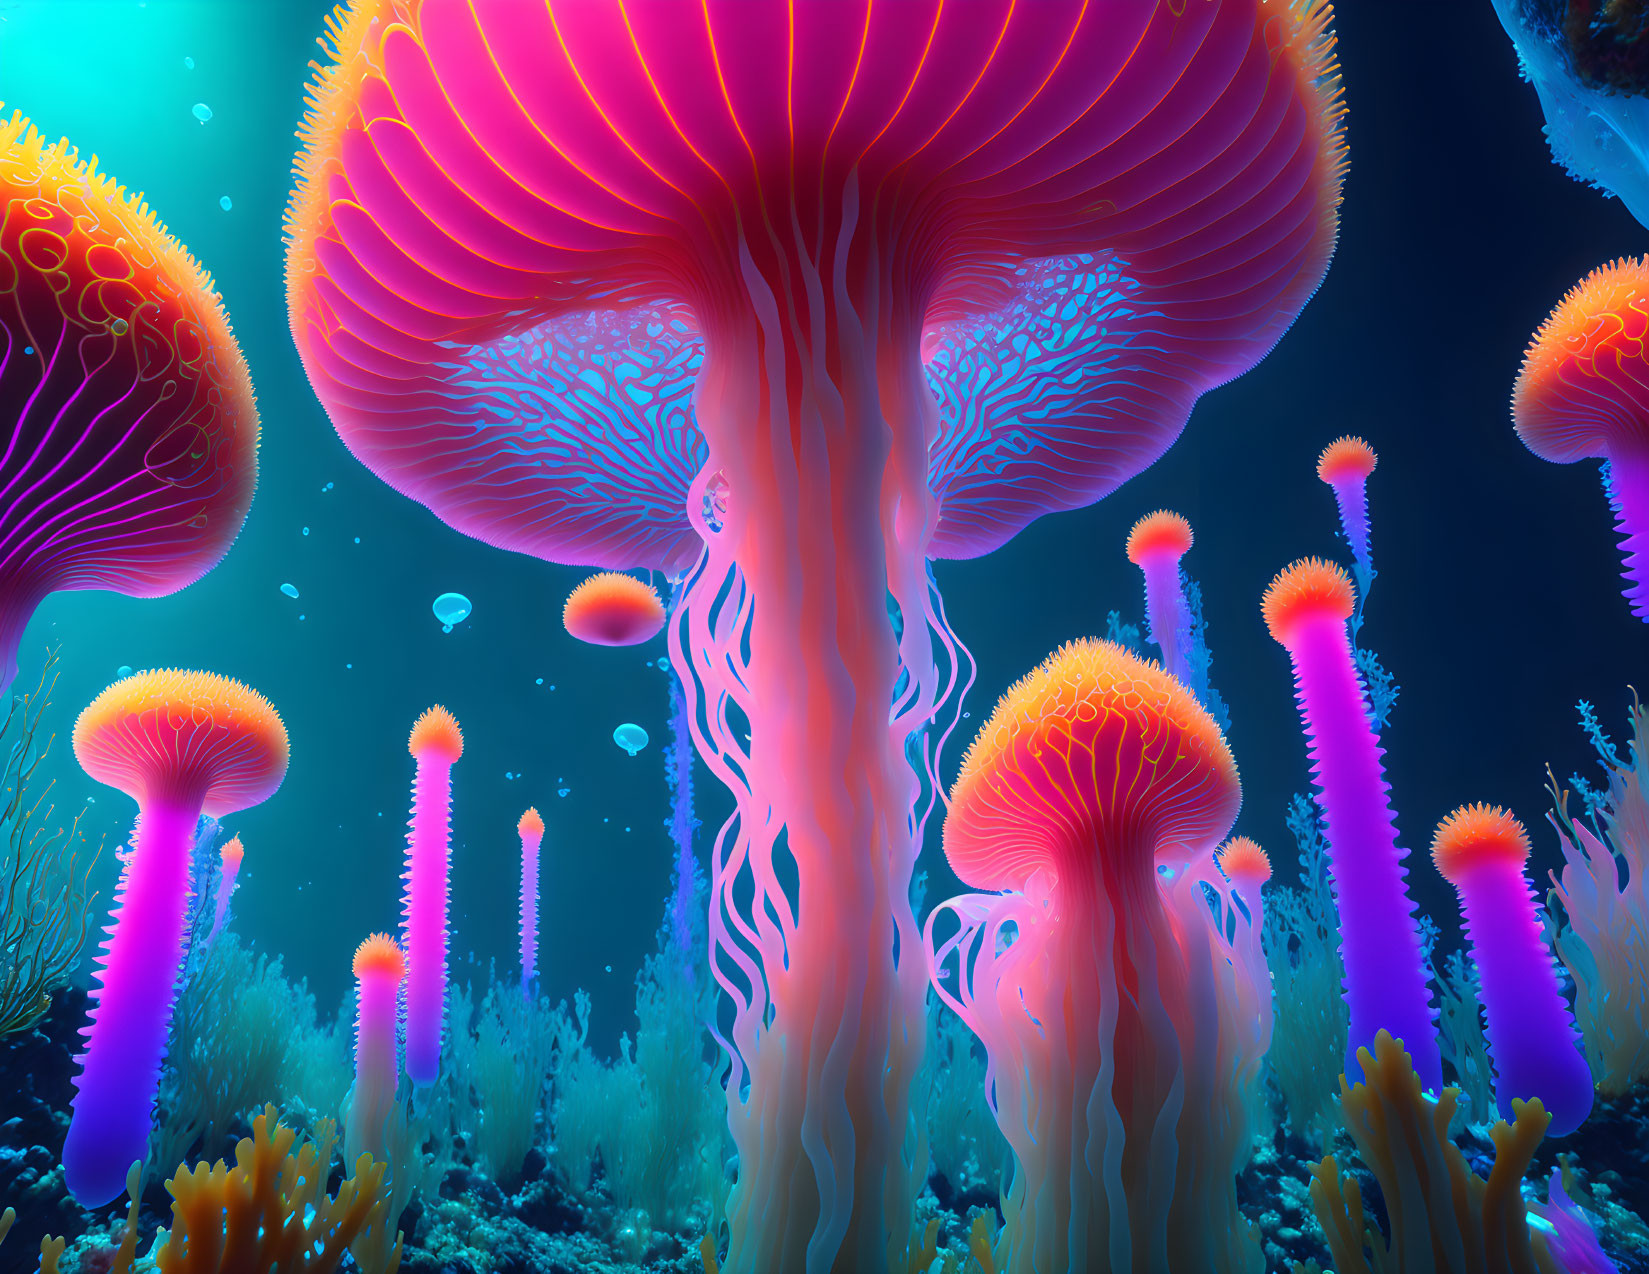 Neon jellyfish and coral in surreal underwater scene